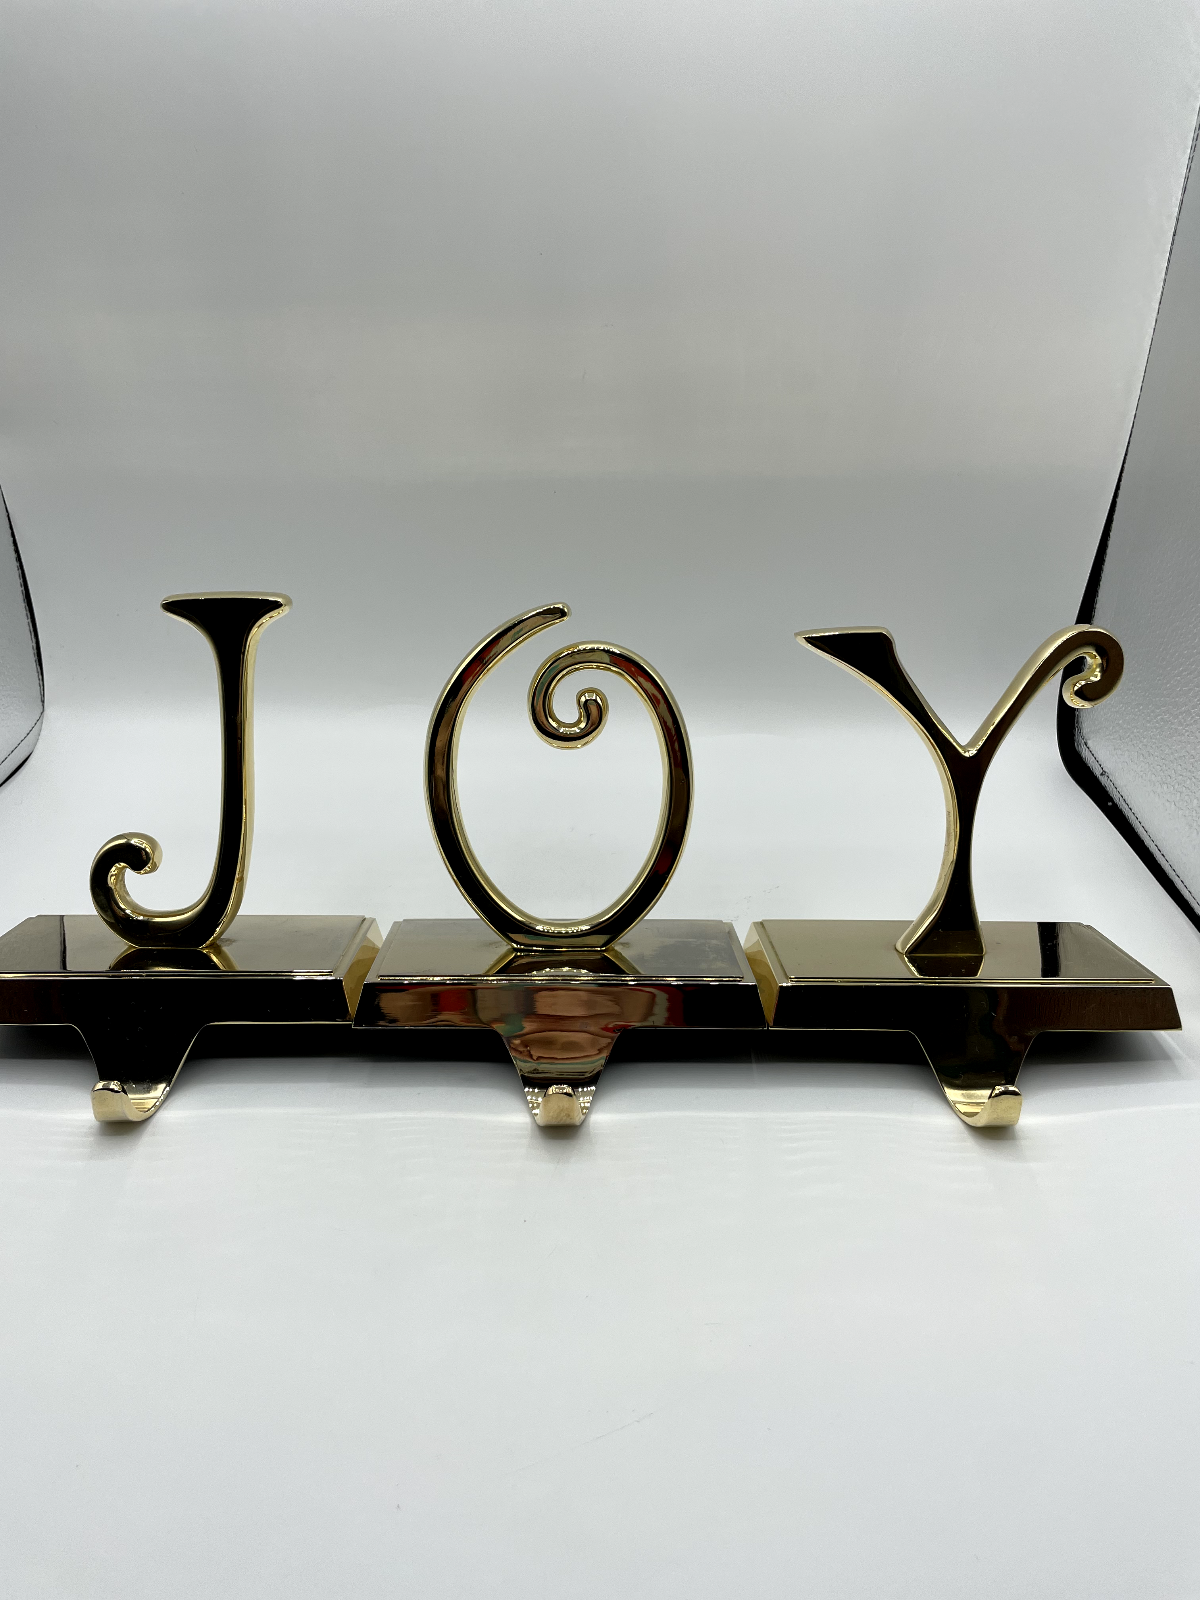 Pottery Barn JOY Stocking Holder 3 pc Set Weighted Silver Tone Christmas Bs256 - $35.52